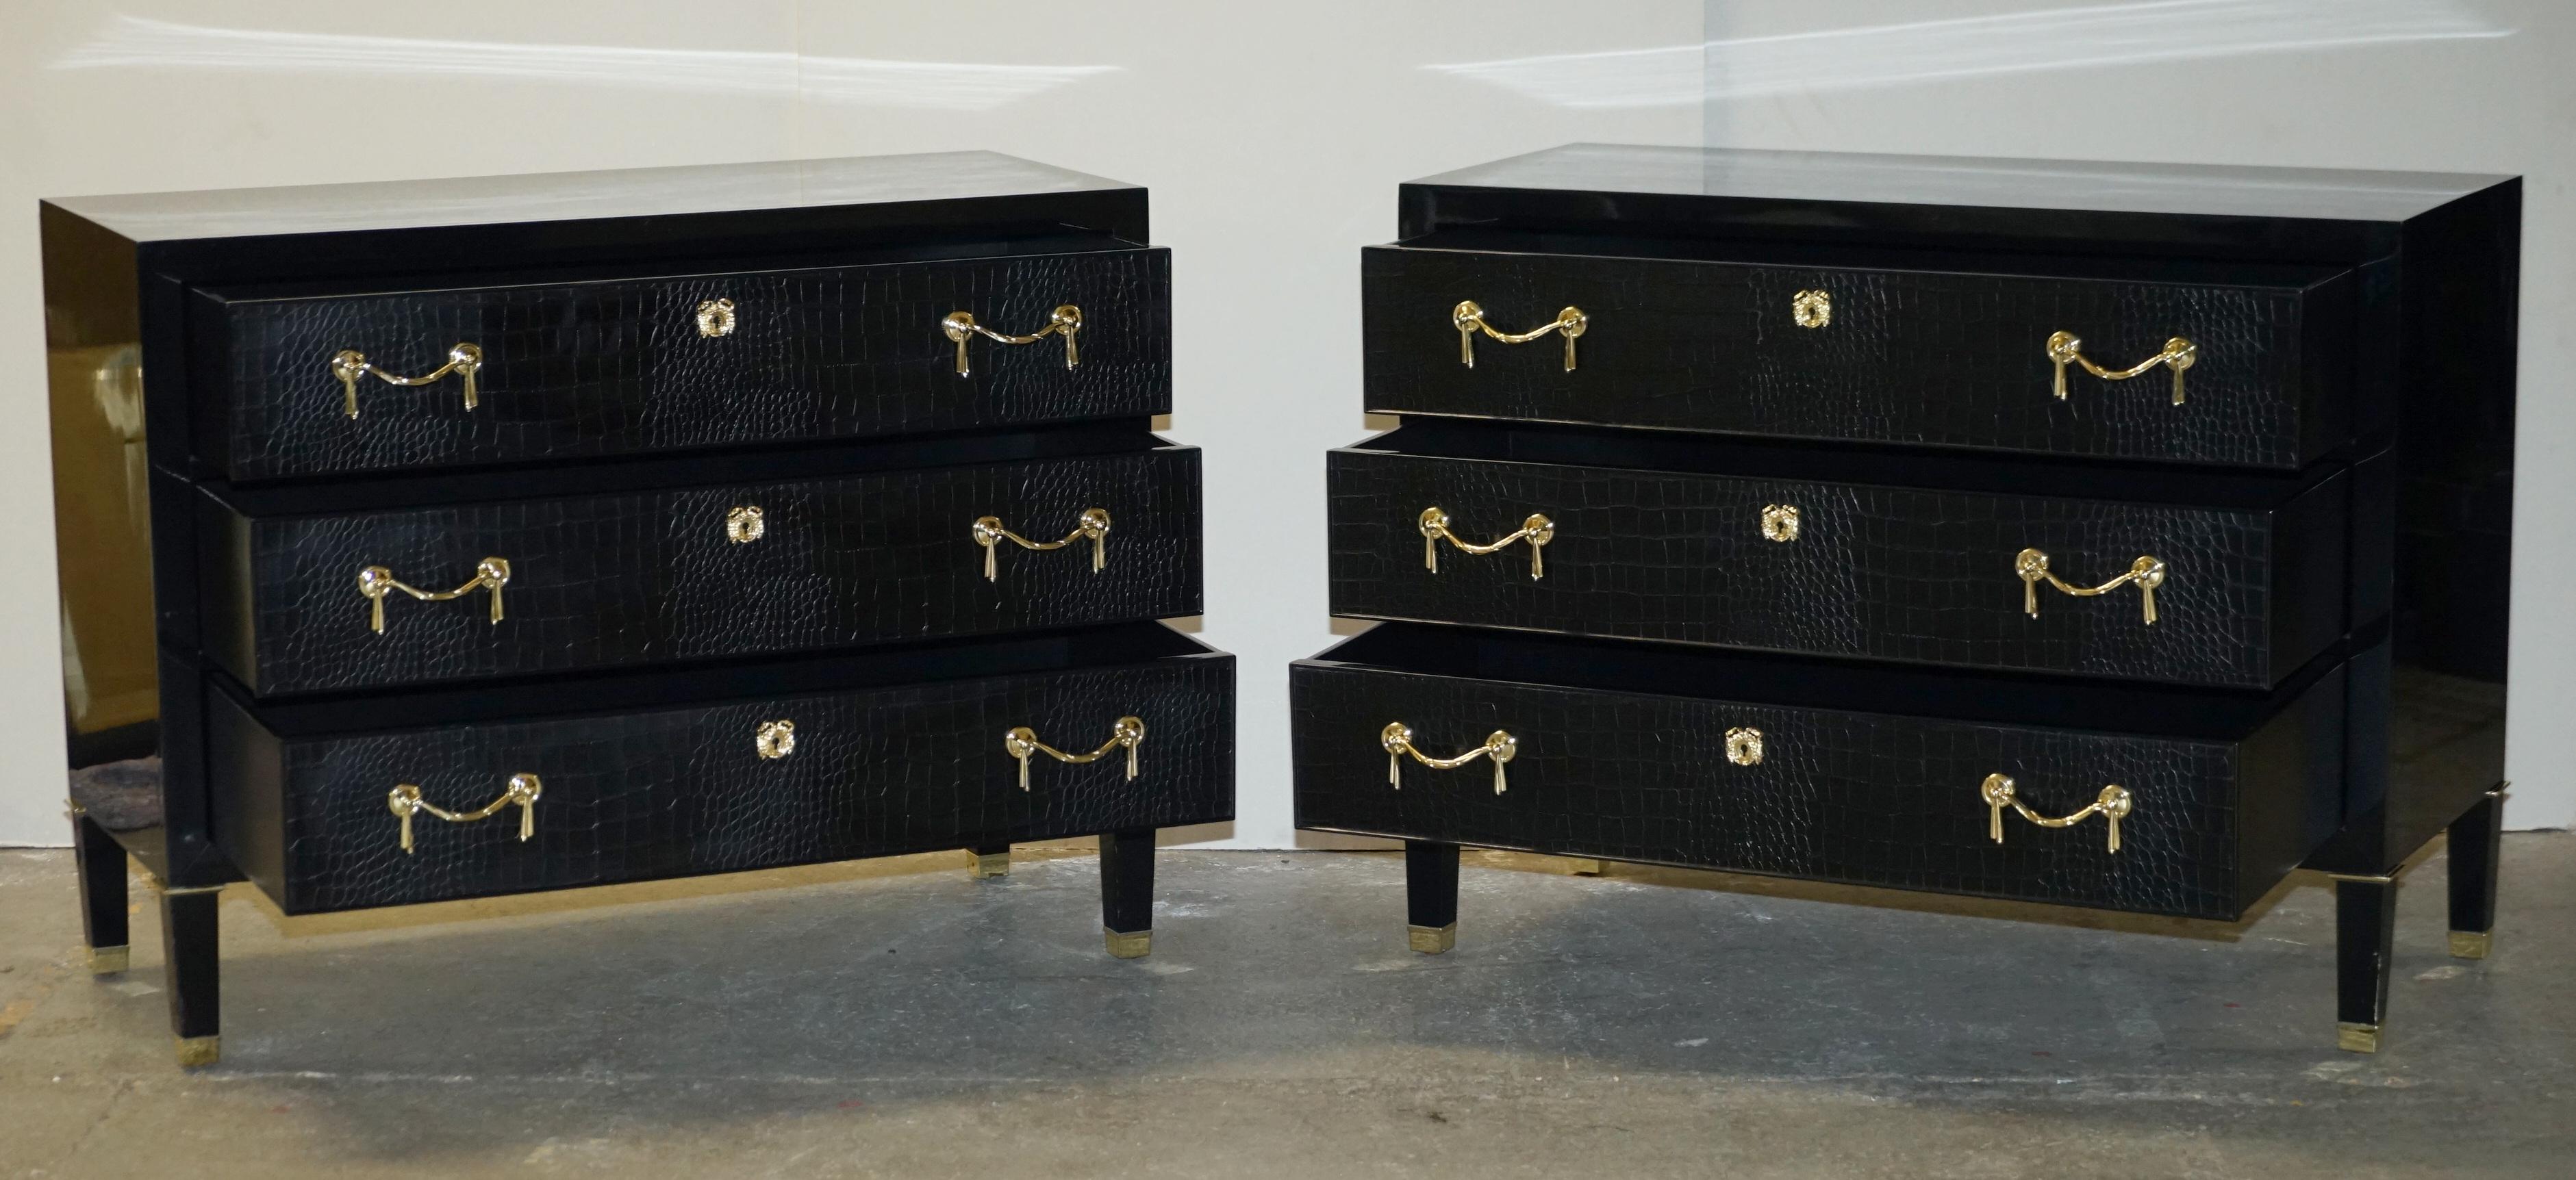 PAIR OF RALPH LAUREN BROOK STREET CHEST OF DRAWERS ALLiGATOR LEATHER 10